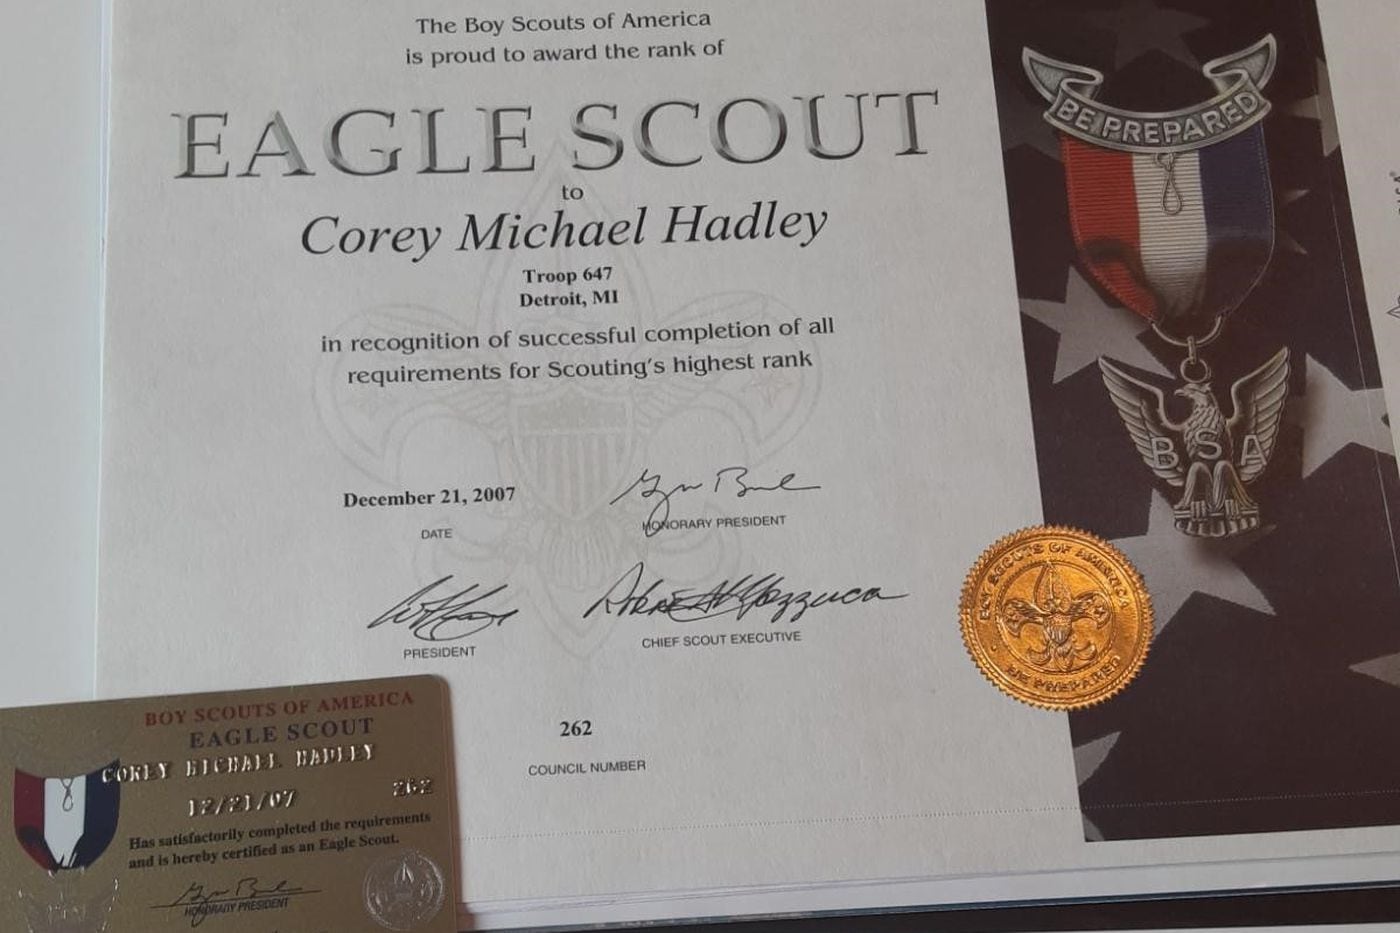 Mr. Hadley was an Eagle Scout at age 18.